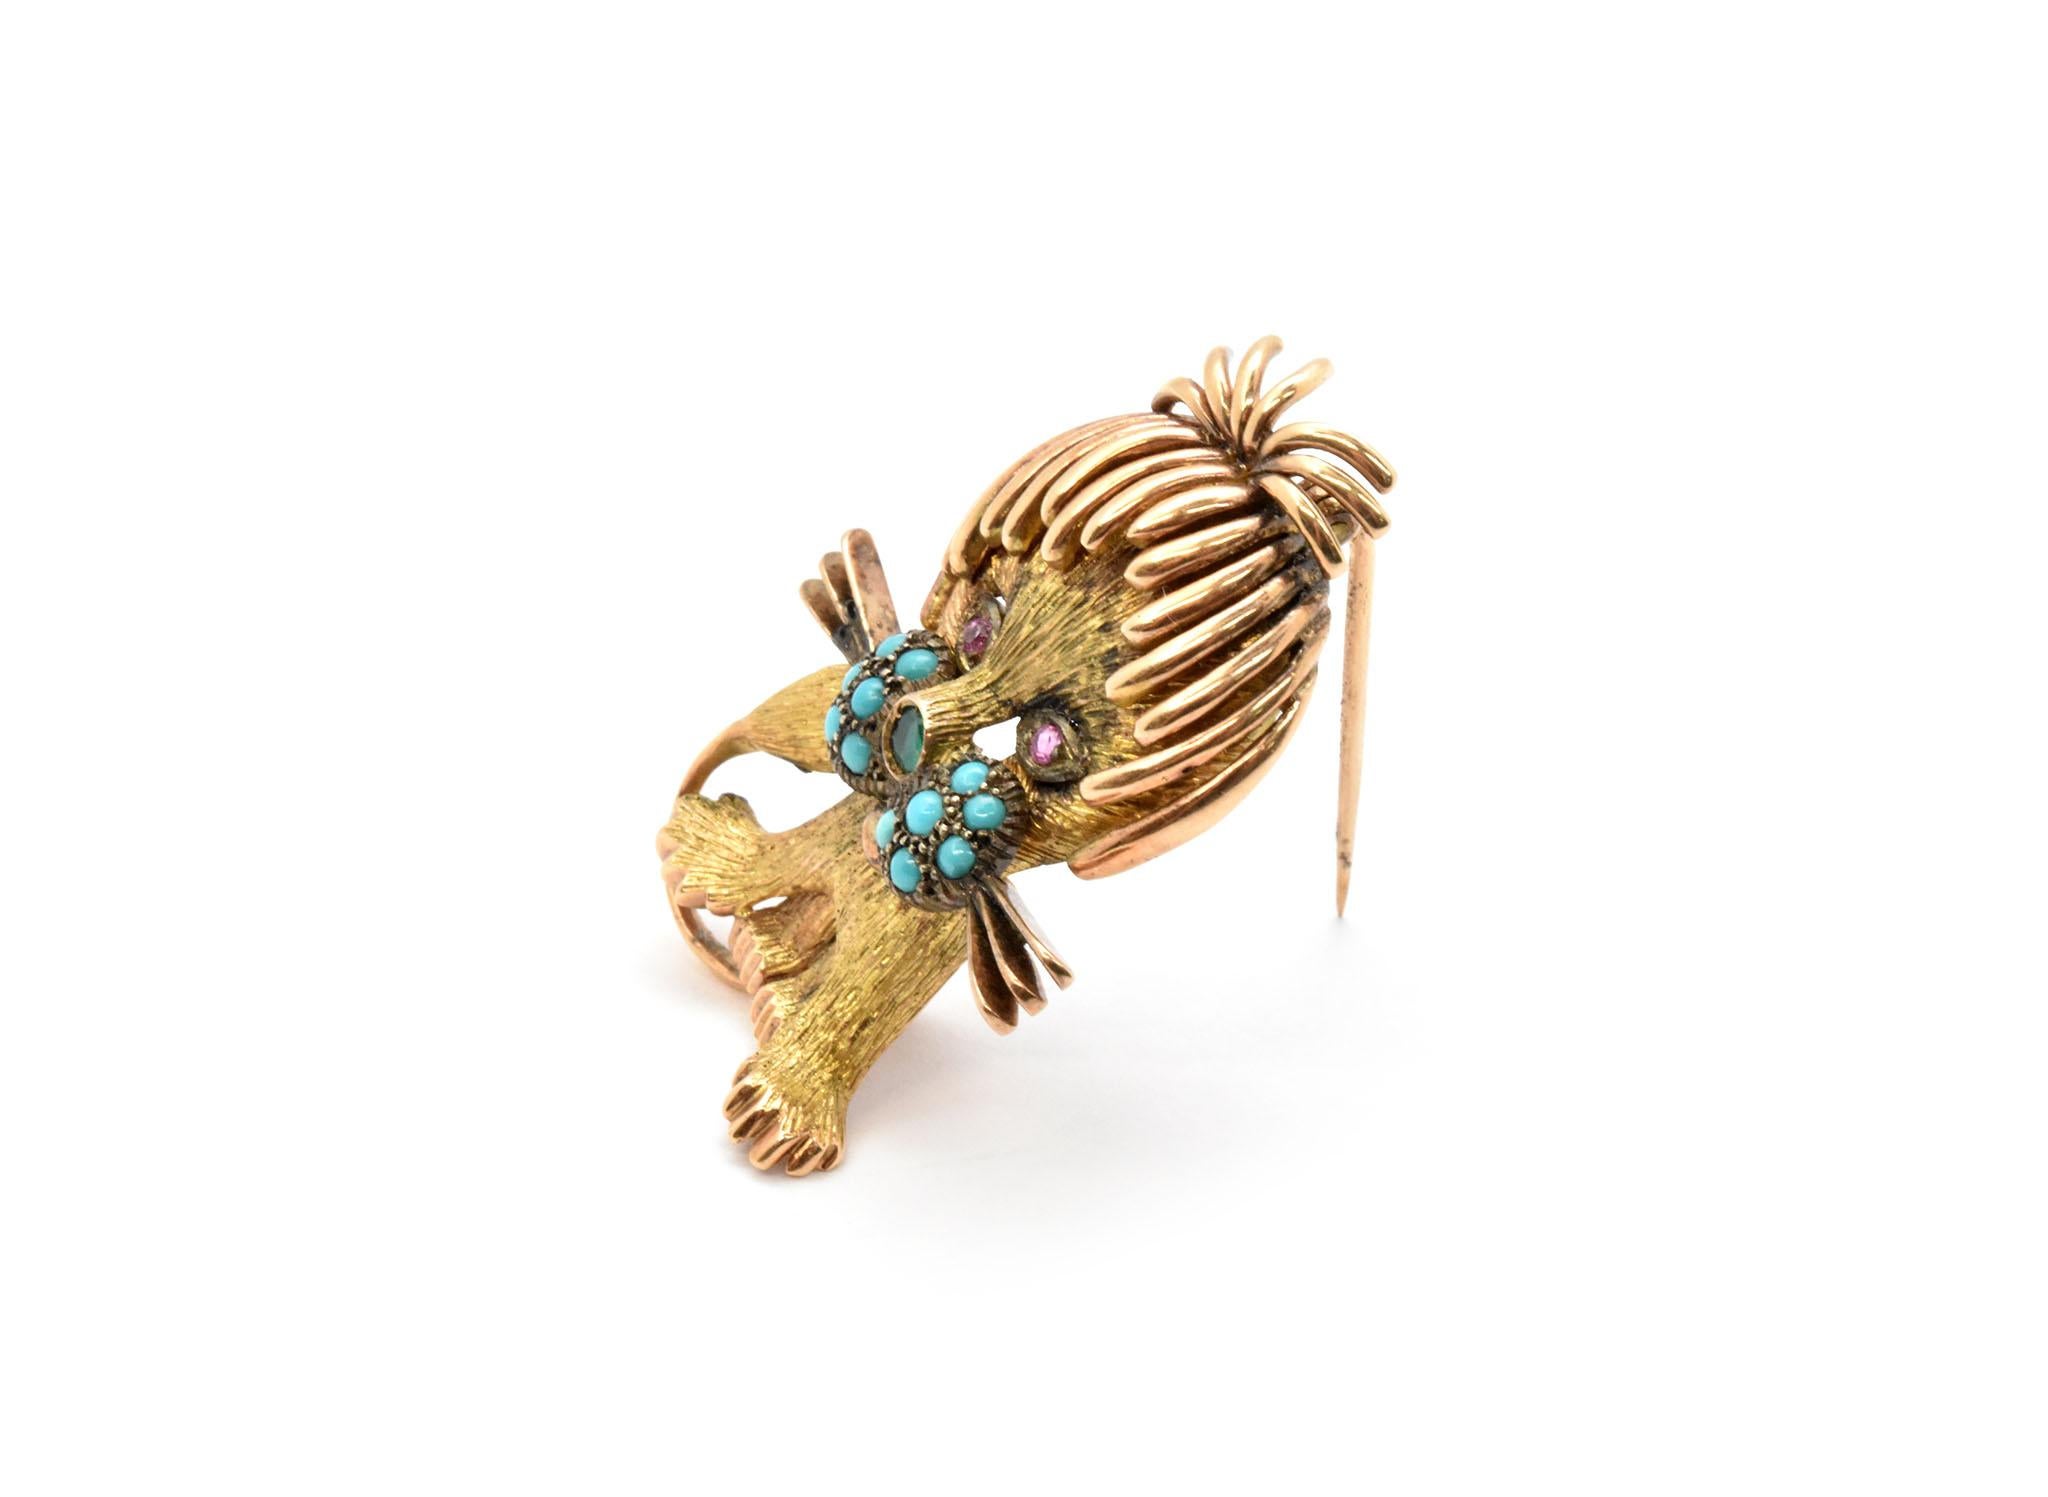 Art Deco 14 Karat Yellow/Rose Gold Cat Brooch with Turquoise, Emerald and Sapphire